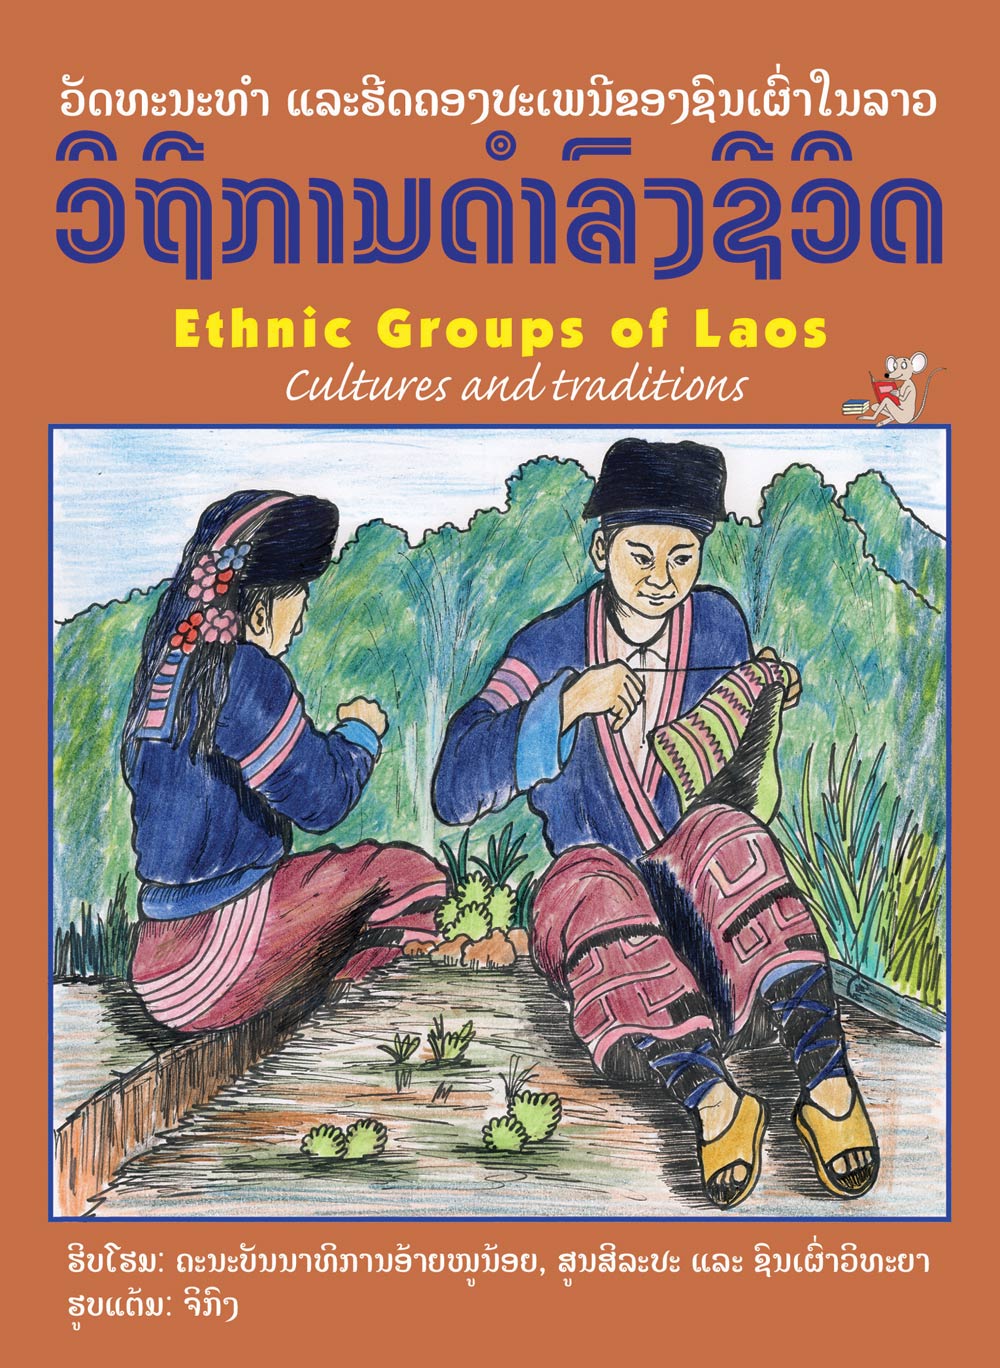 Ethnic Groups of Laos large book cover, published in Lao and English